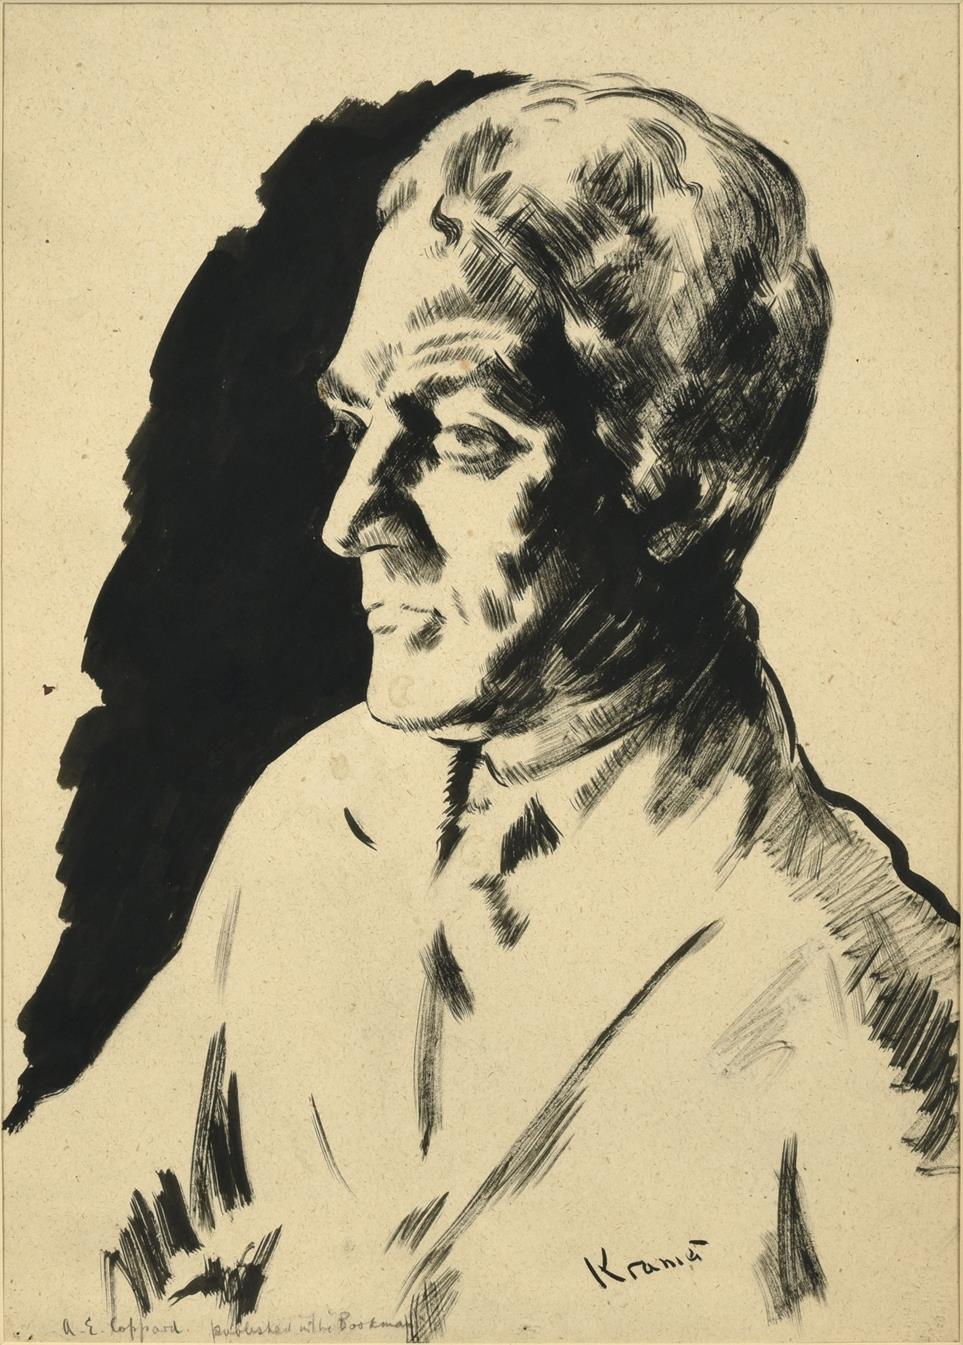 Jacob Kramer (1892-1962) ''A.E. Coppard'', Head and shoulders portrait Signed, inscribed with name